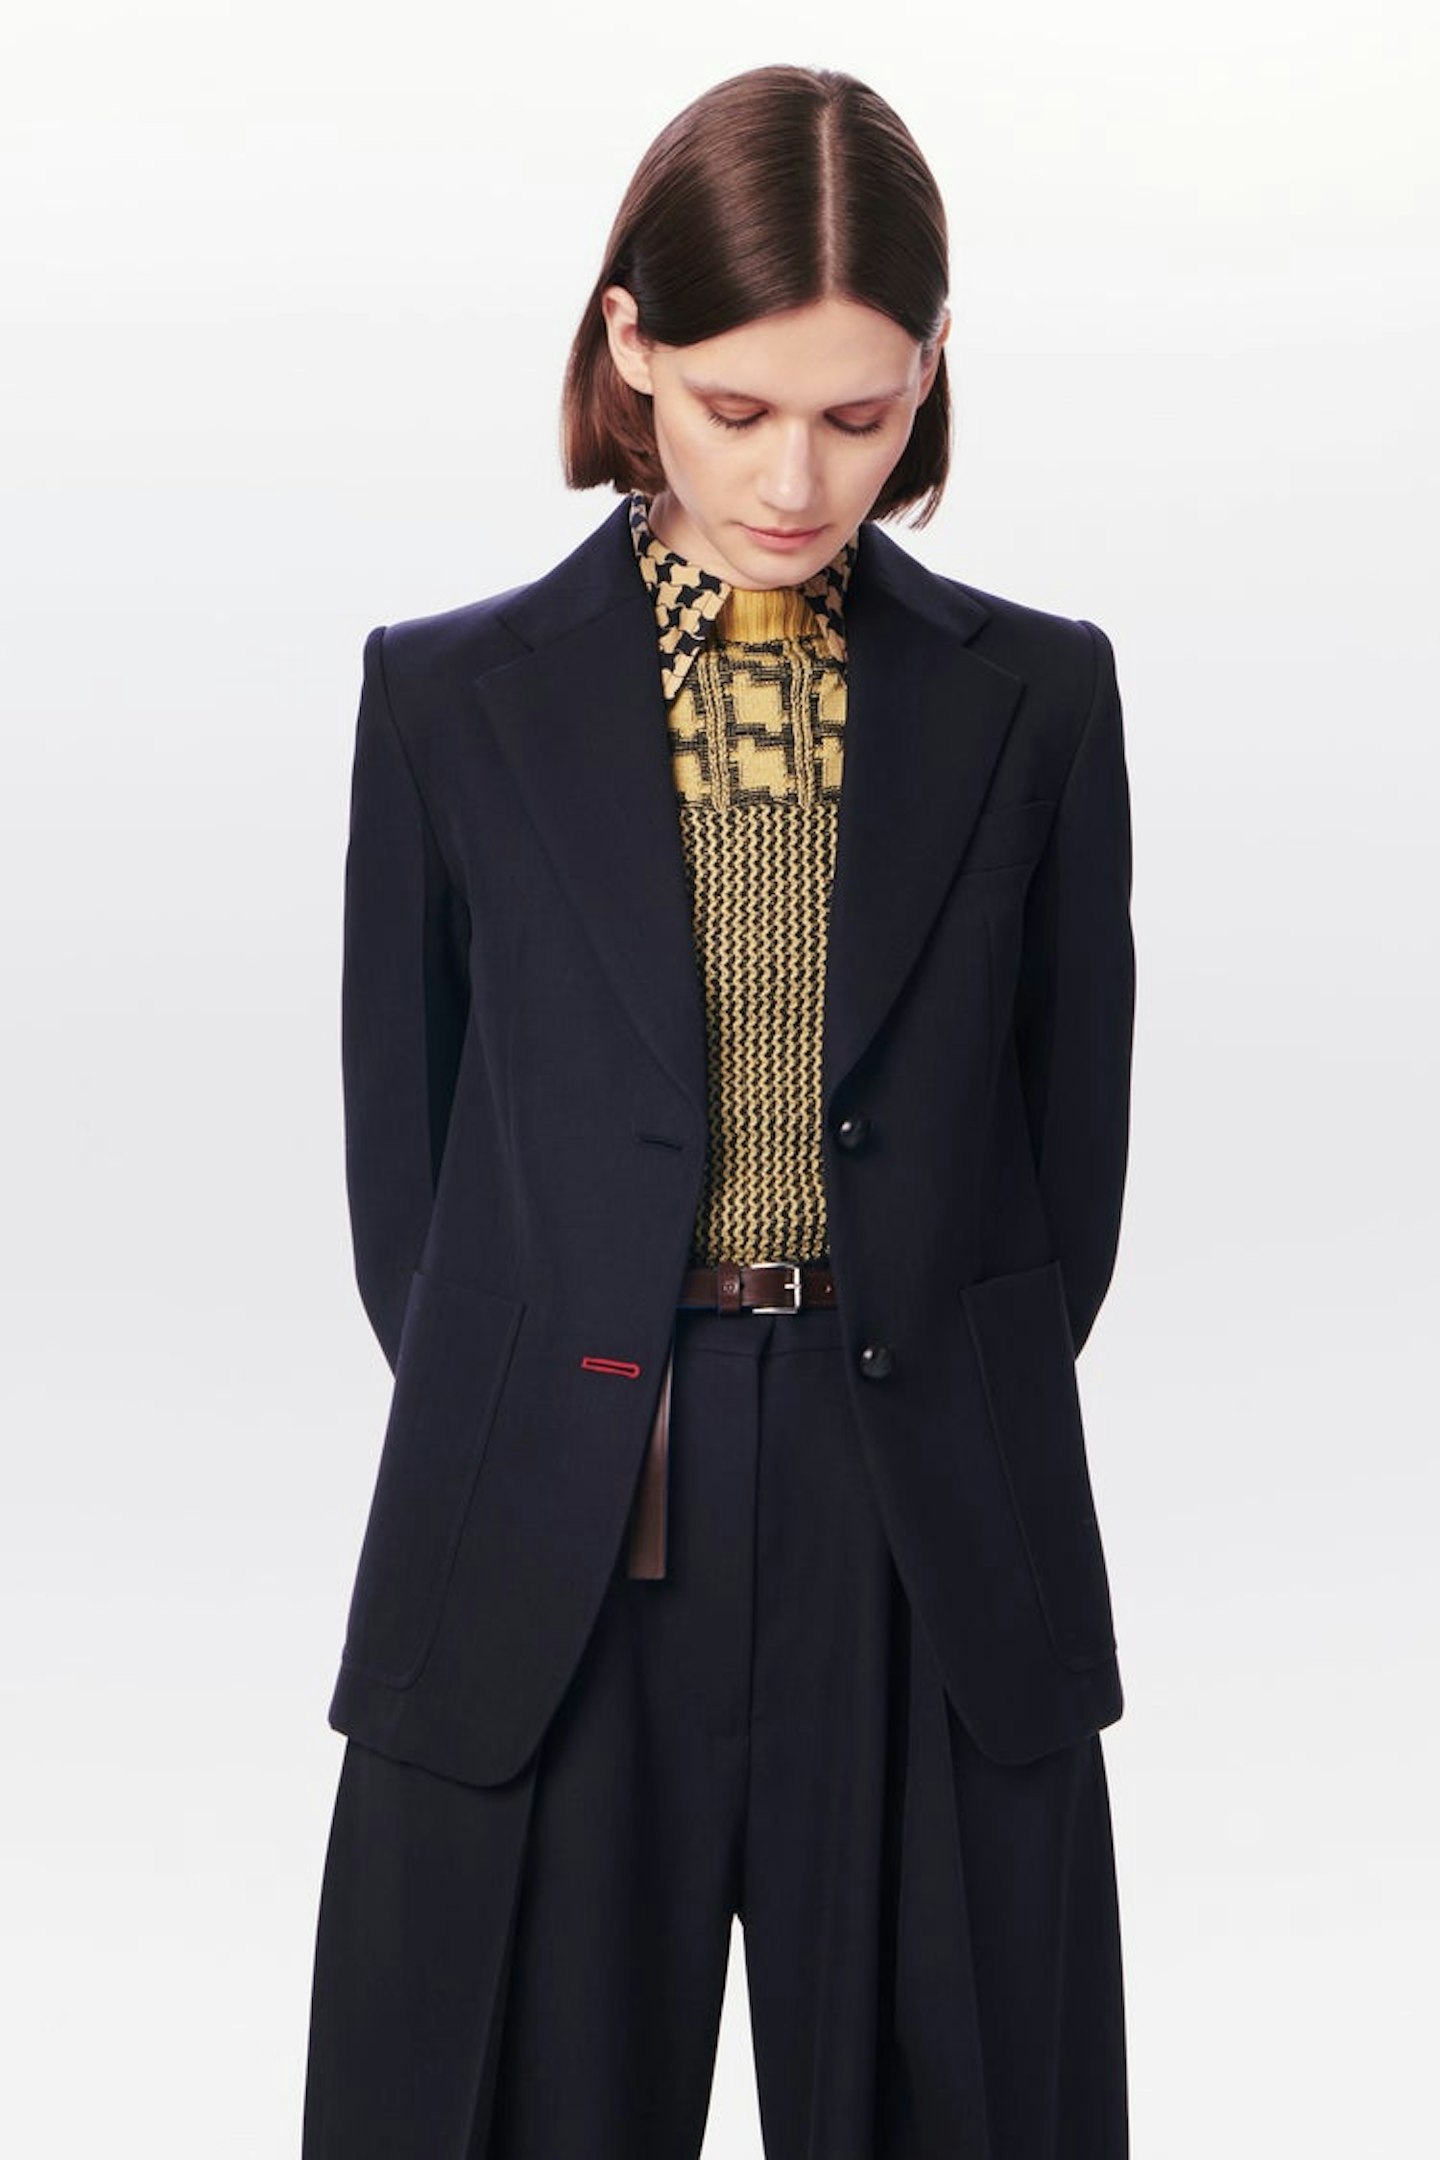 Victoria Beckham, Cropped Tailored Jacket, WAS £1,190 NOW £595